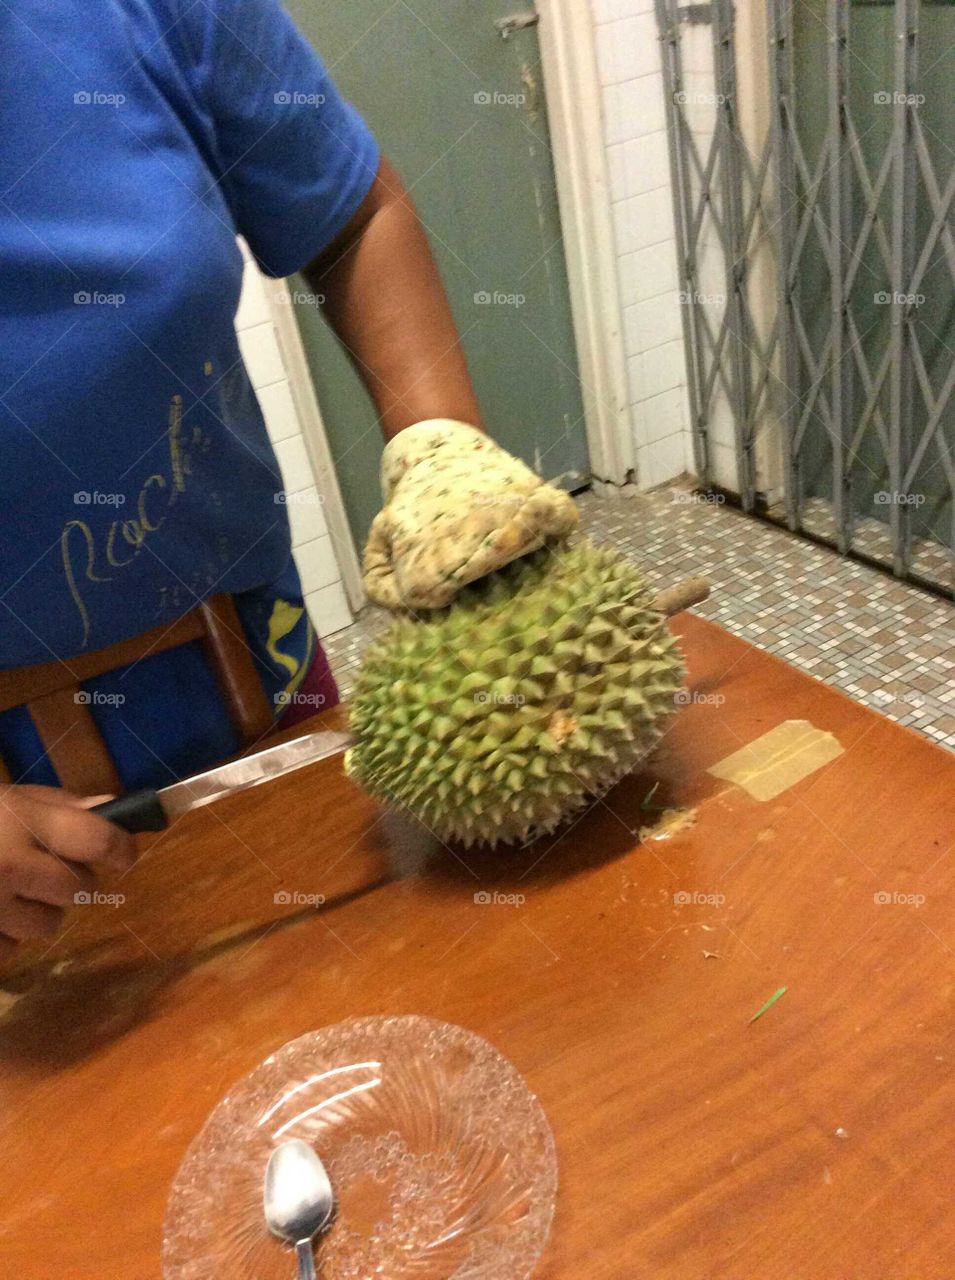 Durian being opened